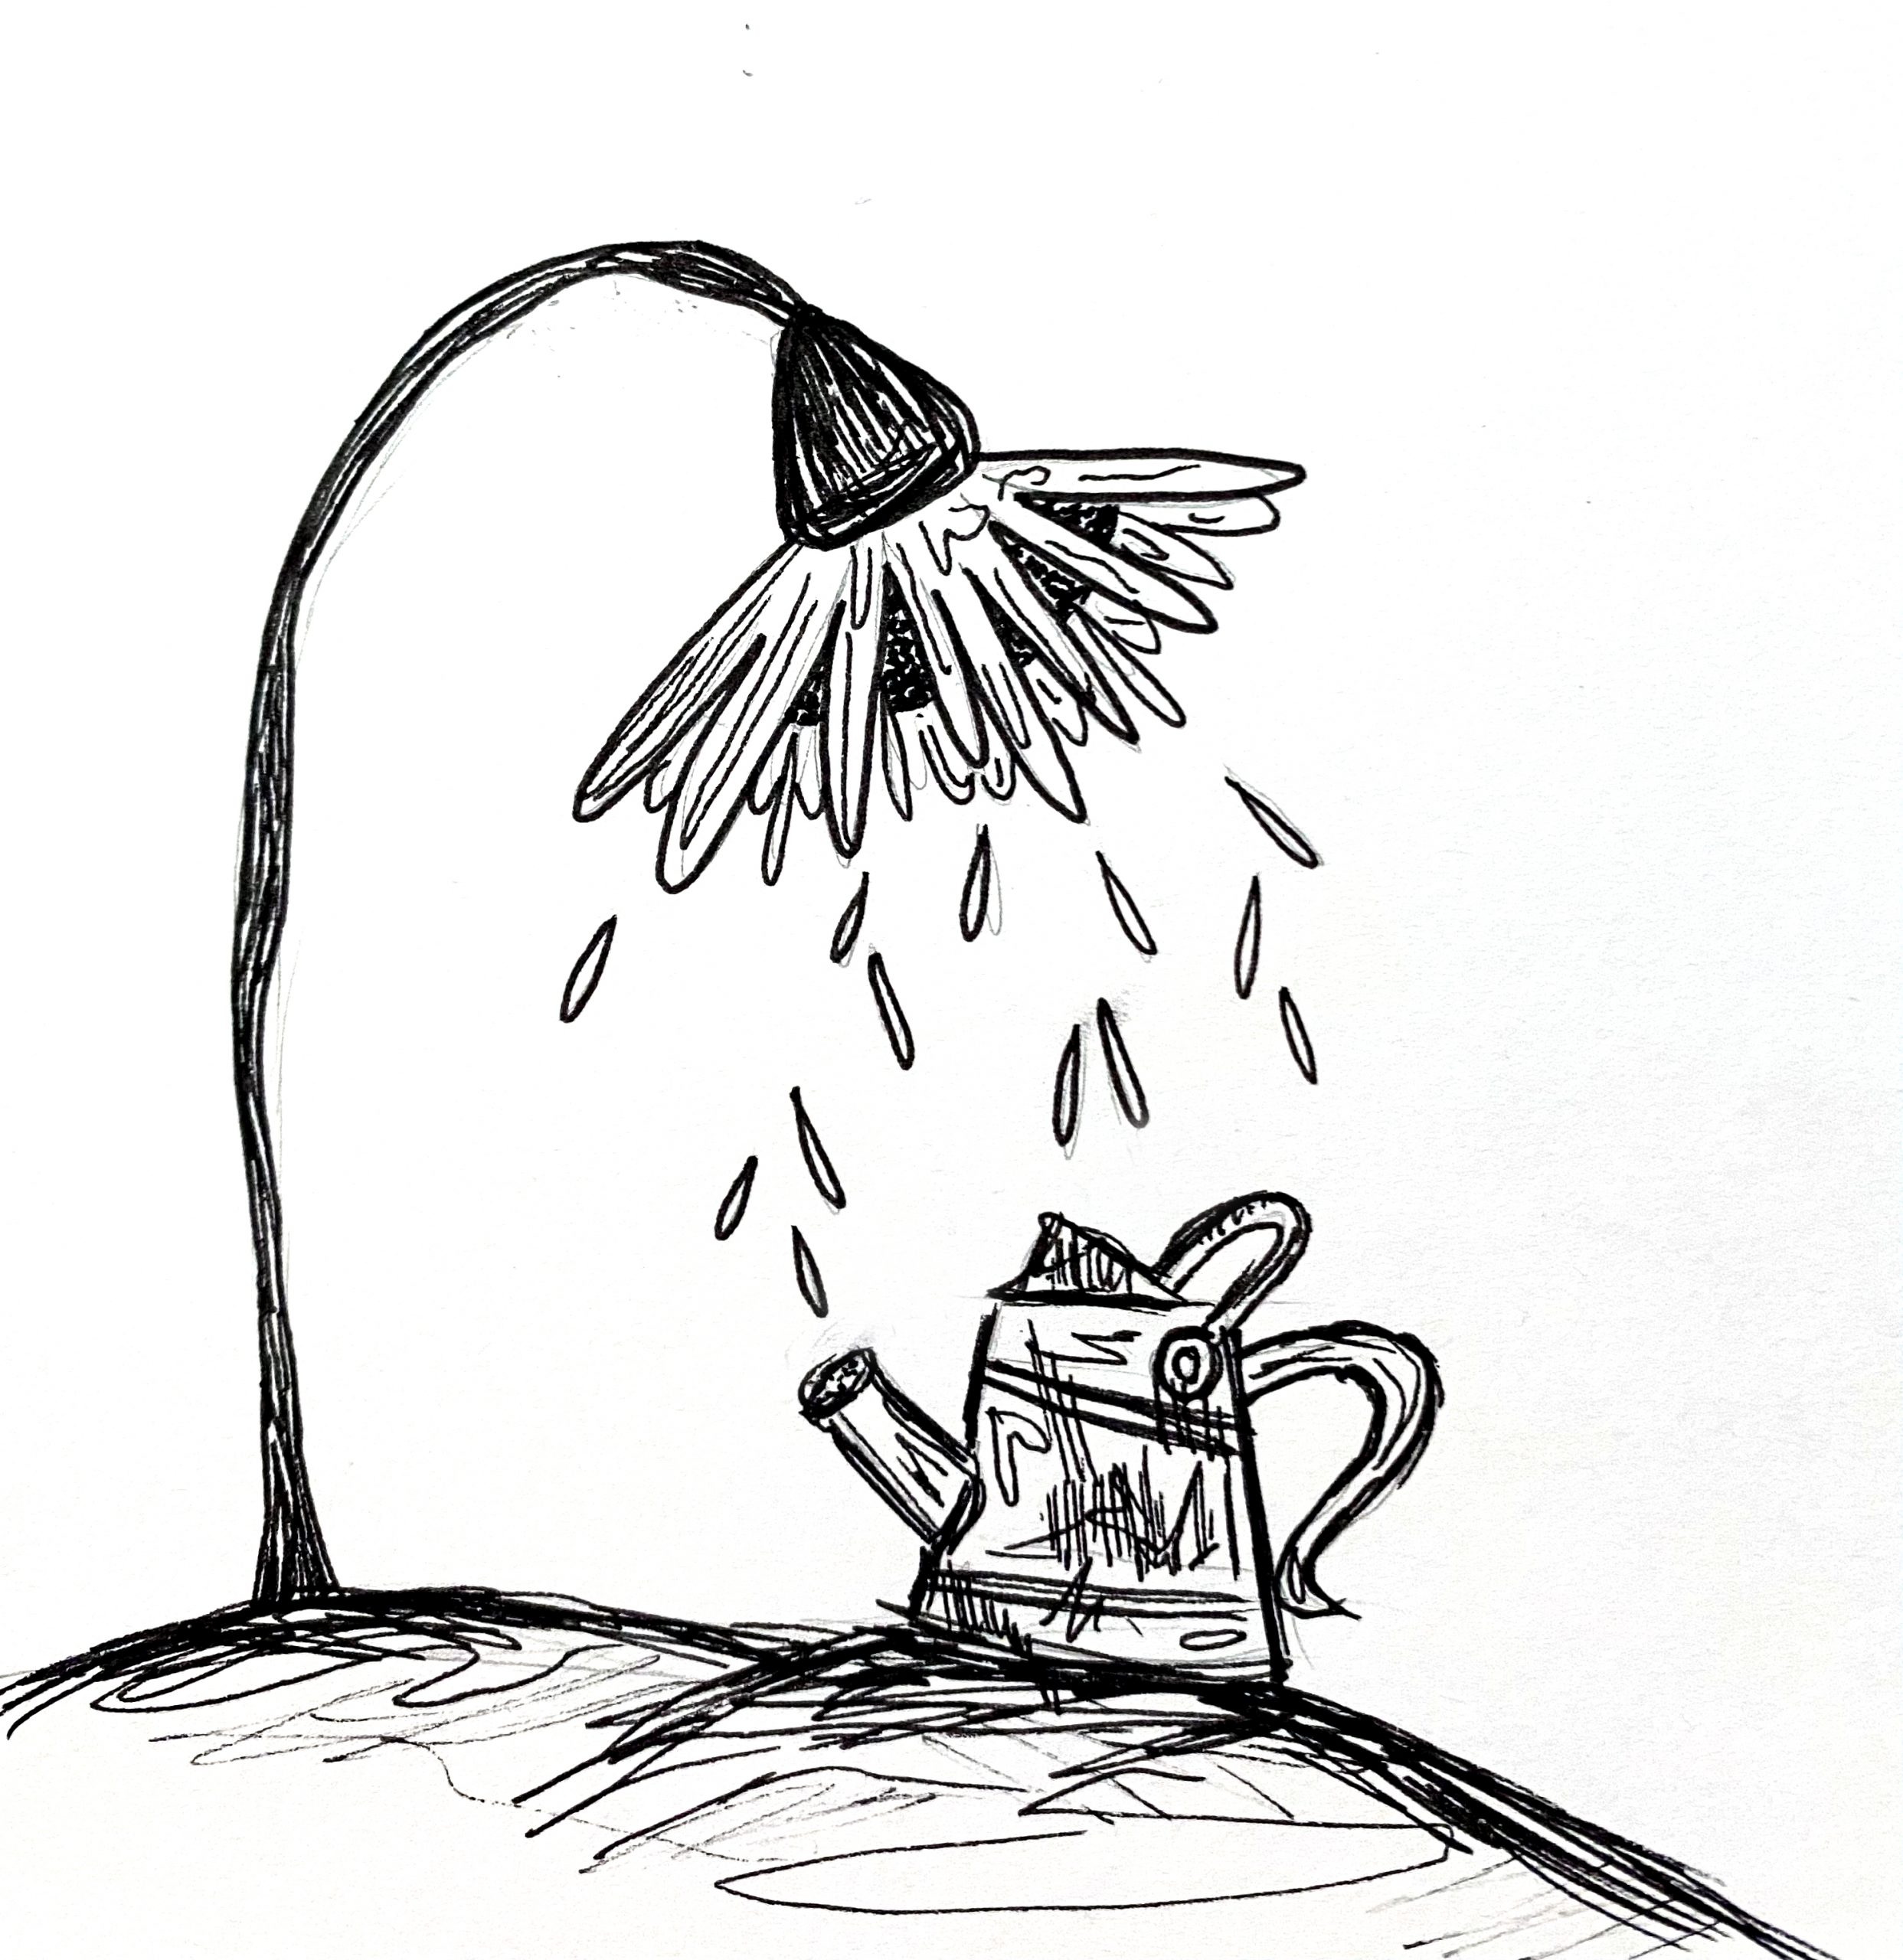 This is an illustration done in black ink of a sunflower that is bent over a watering can. There are petals falling off of the flower and they are going into the watering can. They are both positioned on a hill with the flower on the left and the watering can on the right of the image. The flower is also larger than the watering can.